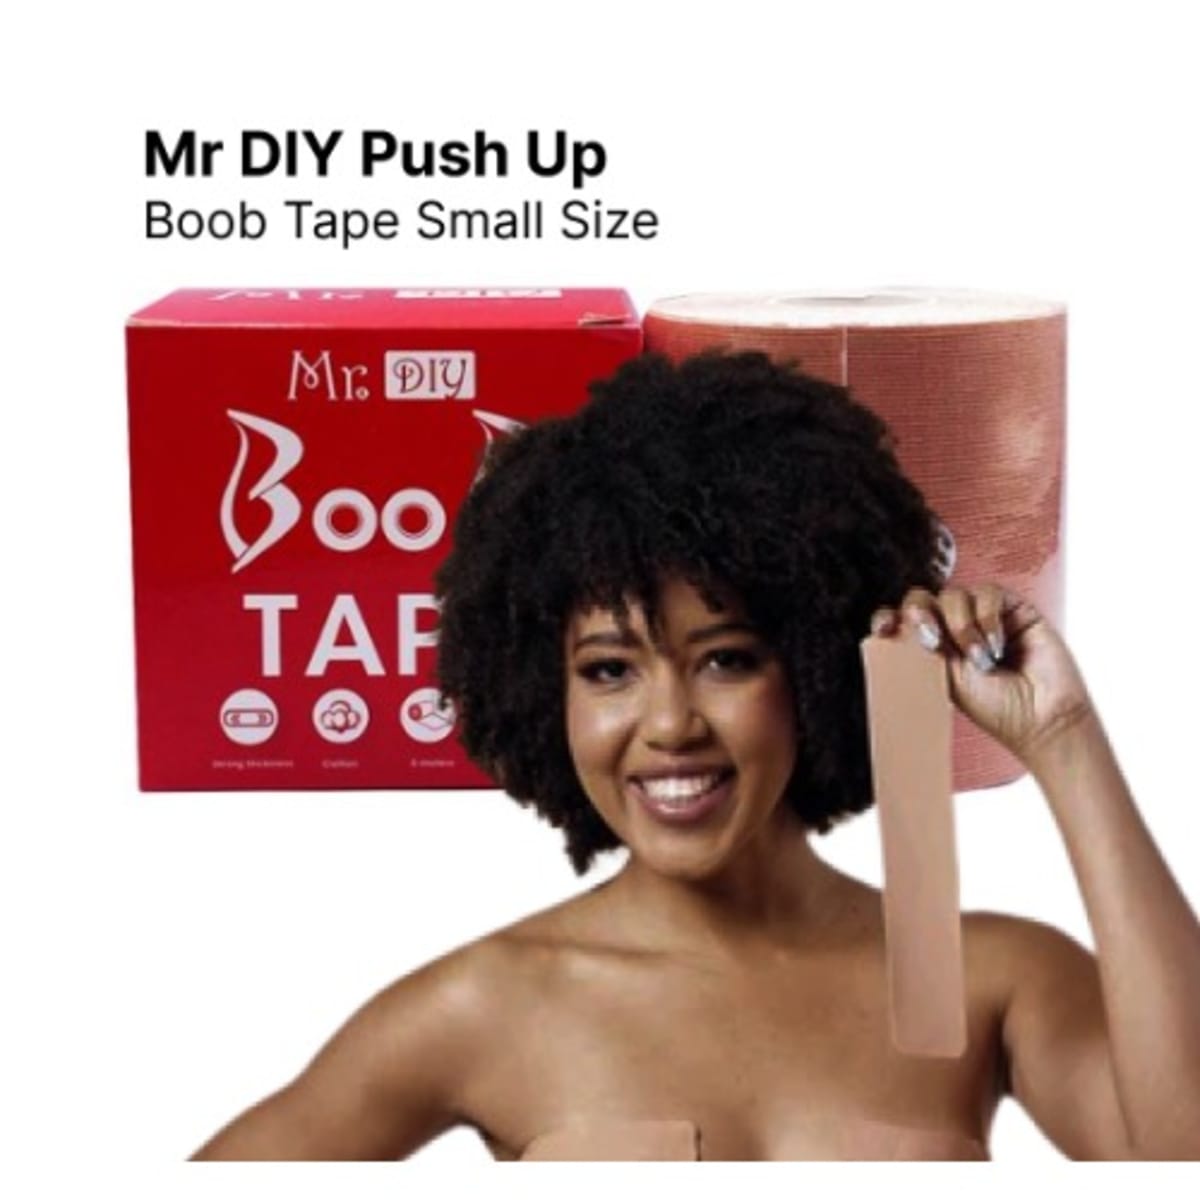 Mr. Diy Plus Size Breast Breathable Push Up Tape, Booby Tape, Firm